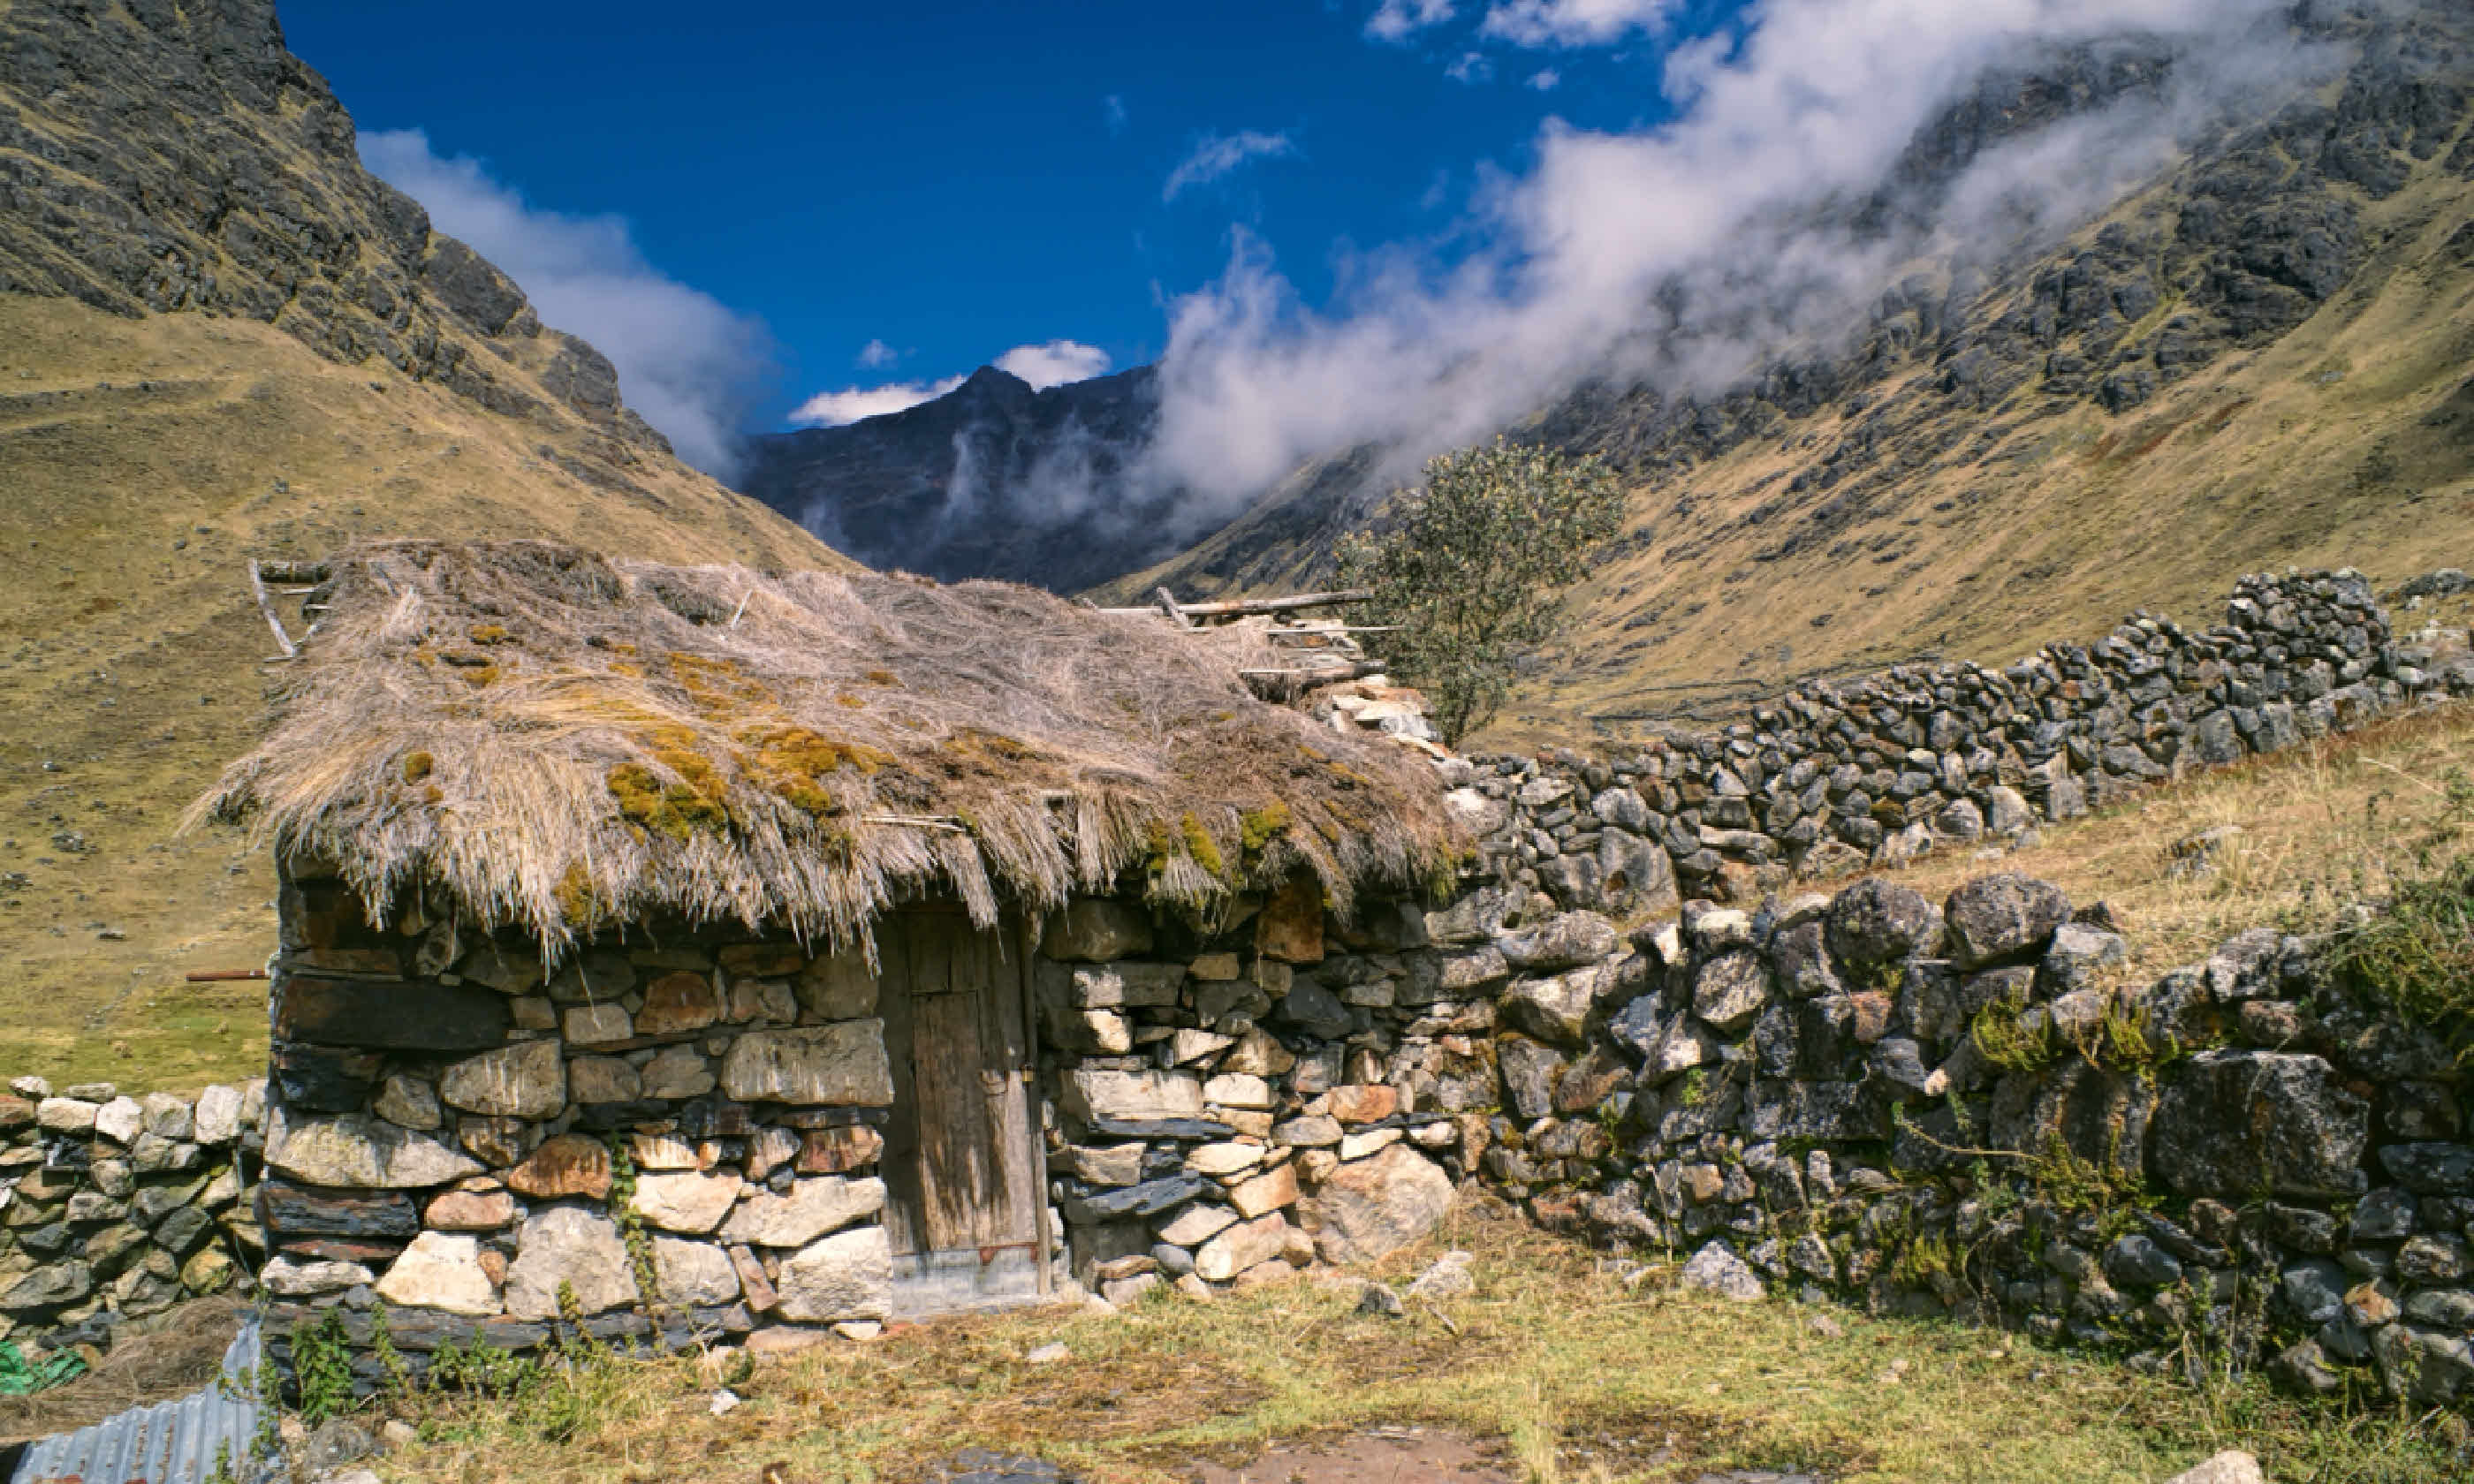 Traditional old stone hut in Andes mountains in Bolivia (Shutterstock)